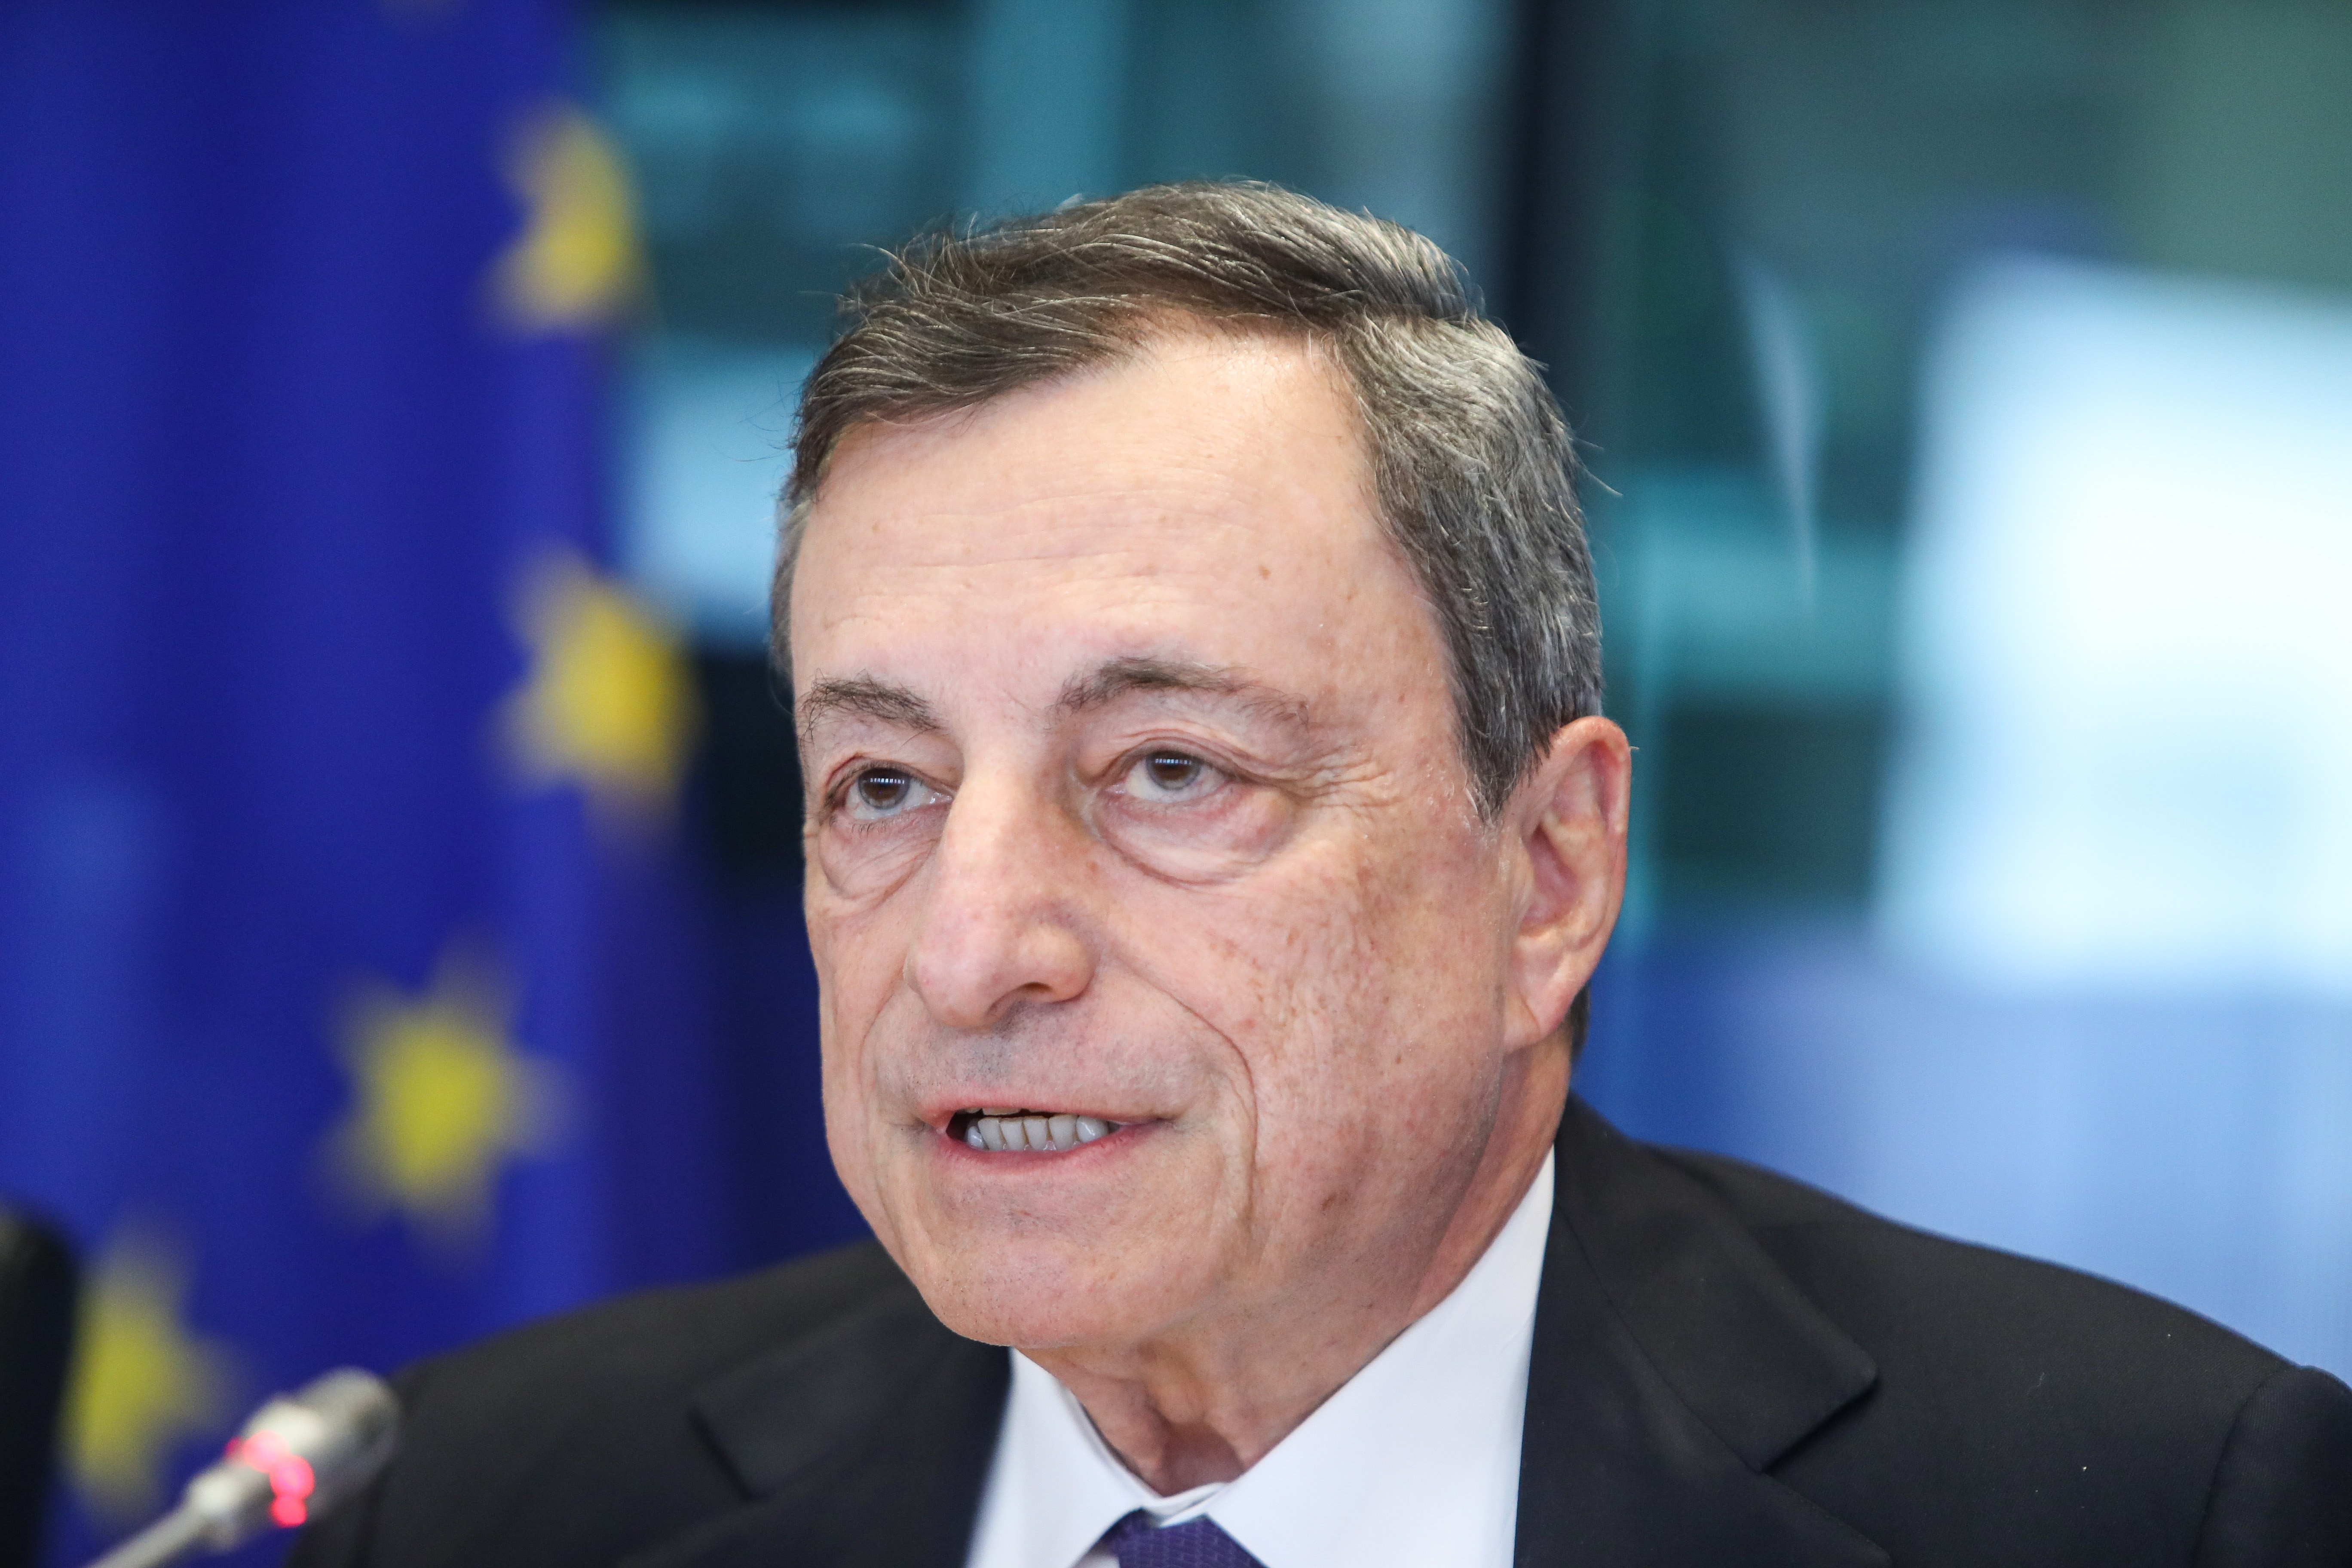 Mario Draghi, president of the European Central Bank and chairman of the European Systemic Risk Board, is among those sounding the alarm over the dip in productivity growth, potentially leading to declines in per capita income and output. Photo: EPA-EF